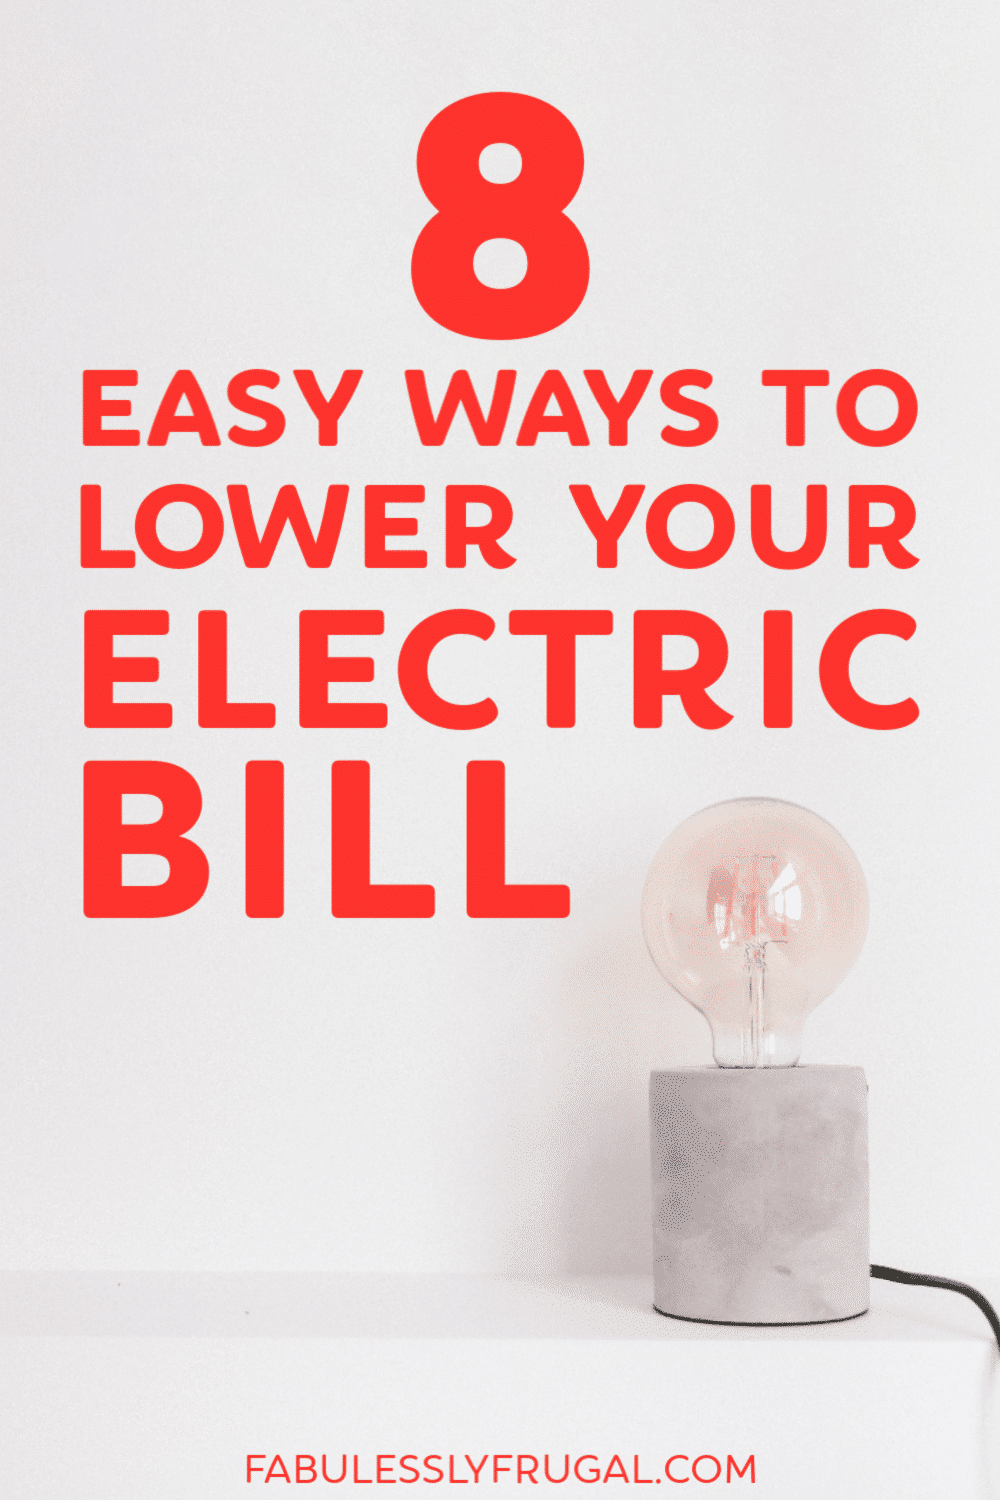 How to lower your electric bill